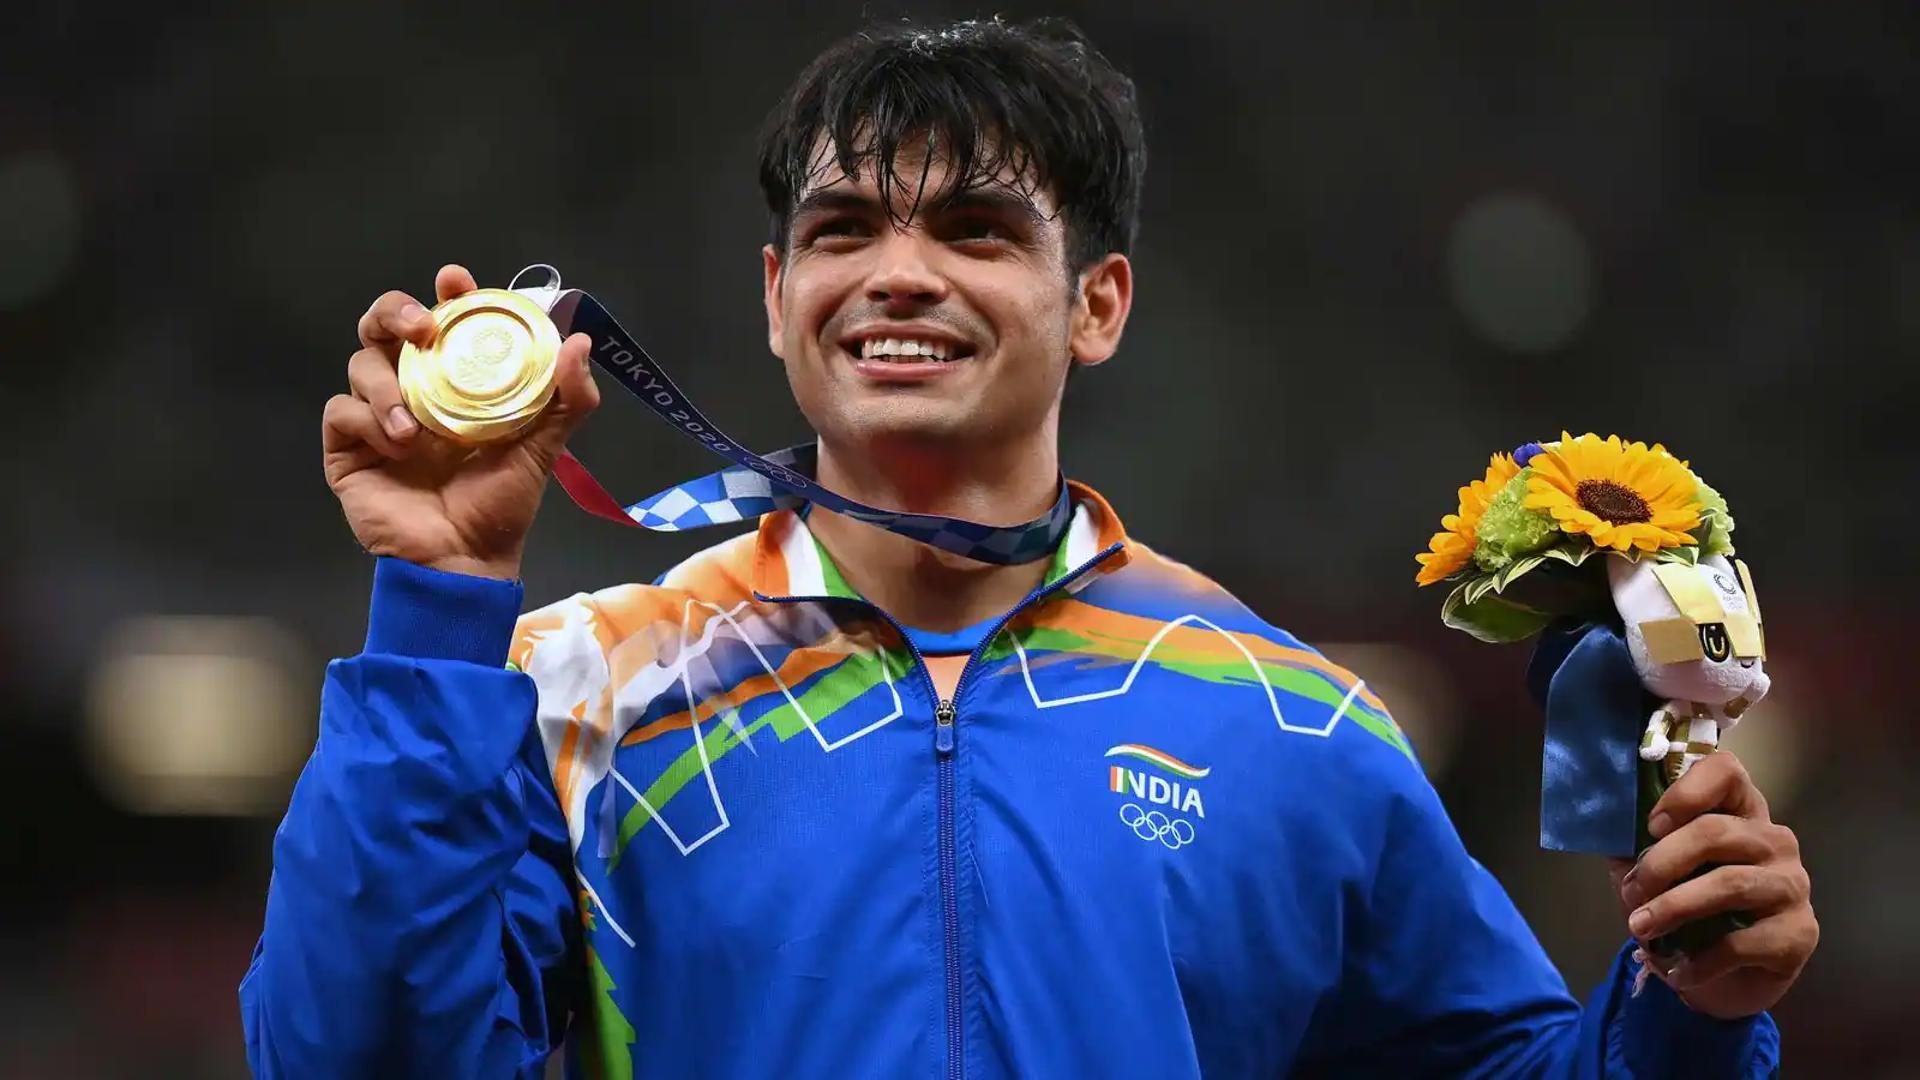 Indian javelin thrower and Olympic champion Neeraj Chopra in a file photo (Image Credits: Twitter)